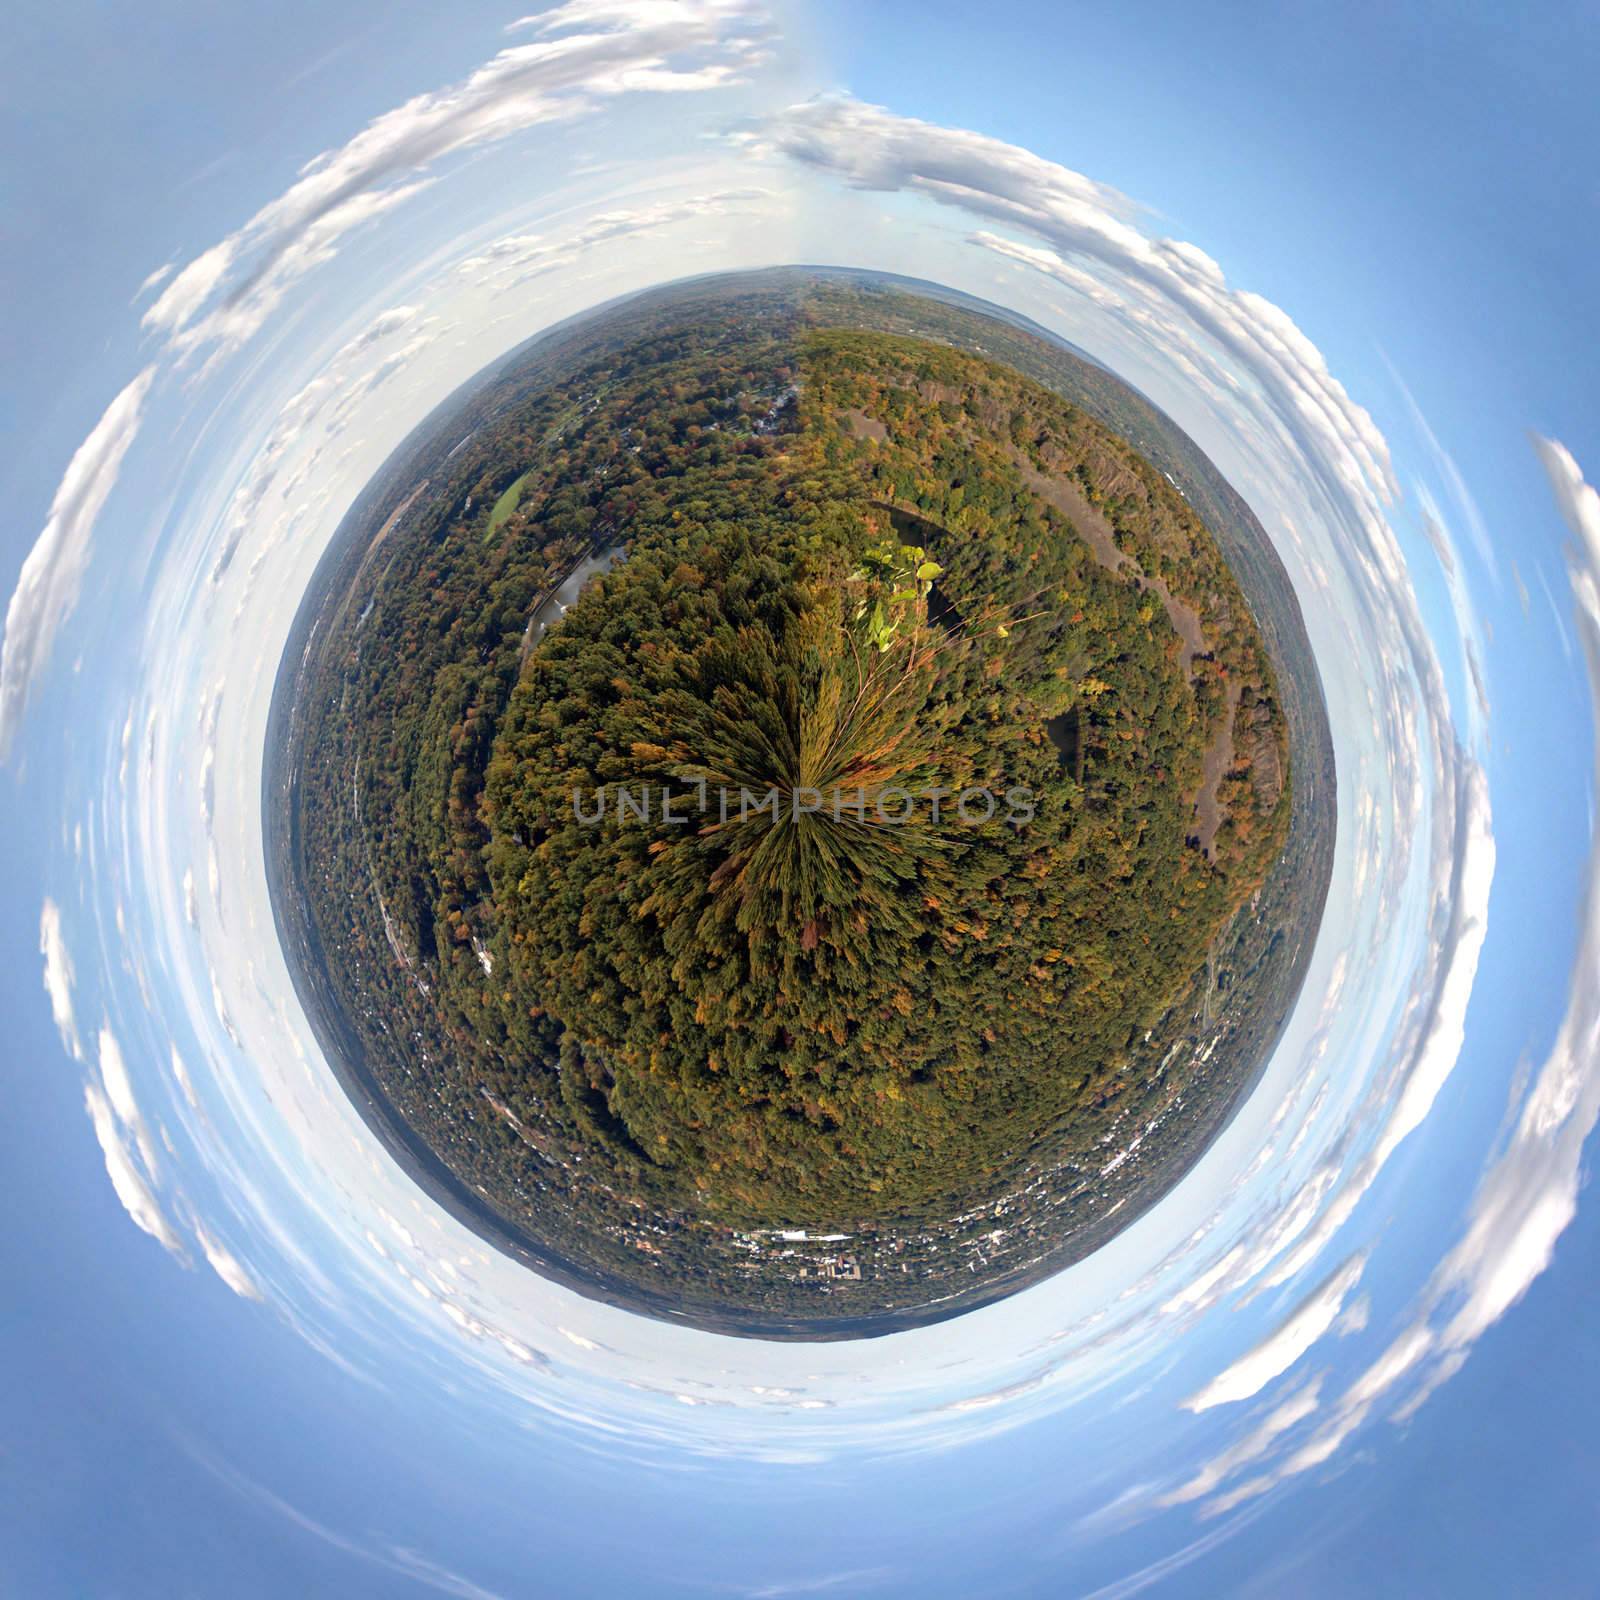 A 360 degree panoramic view of the fall foliage in Meriden Connecticut and Hubbard Park from Craigs Castle.